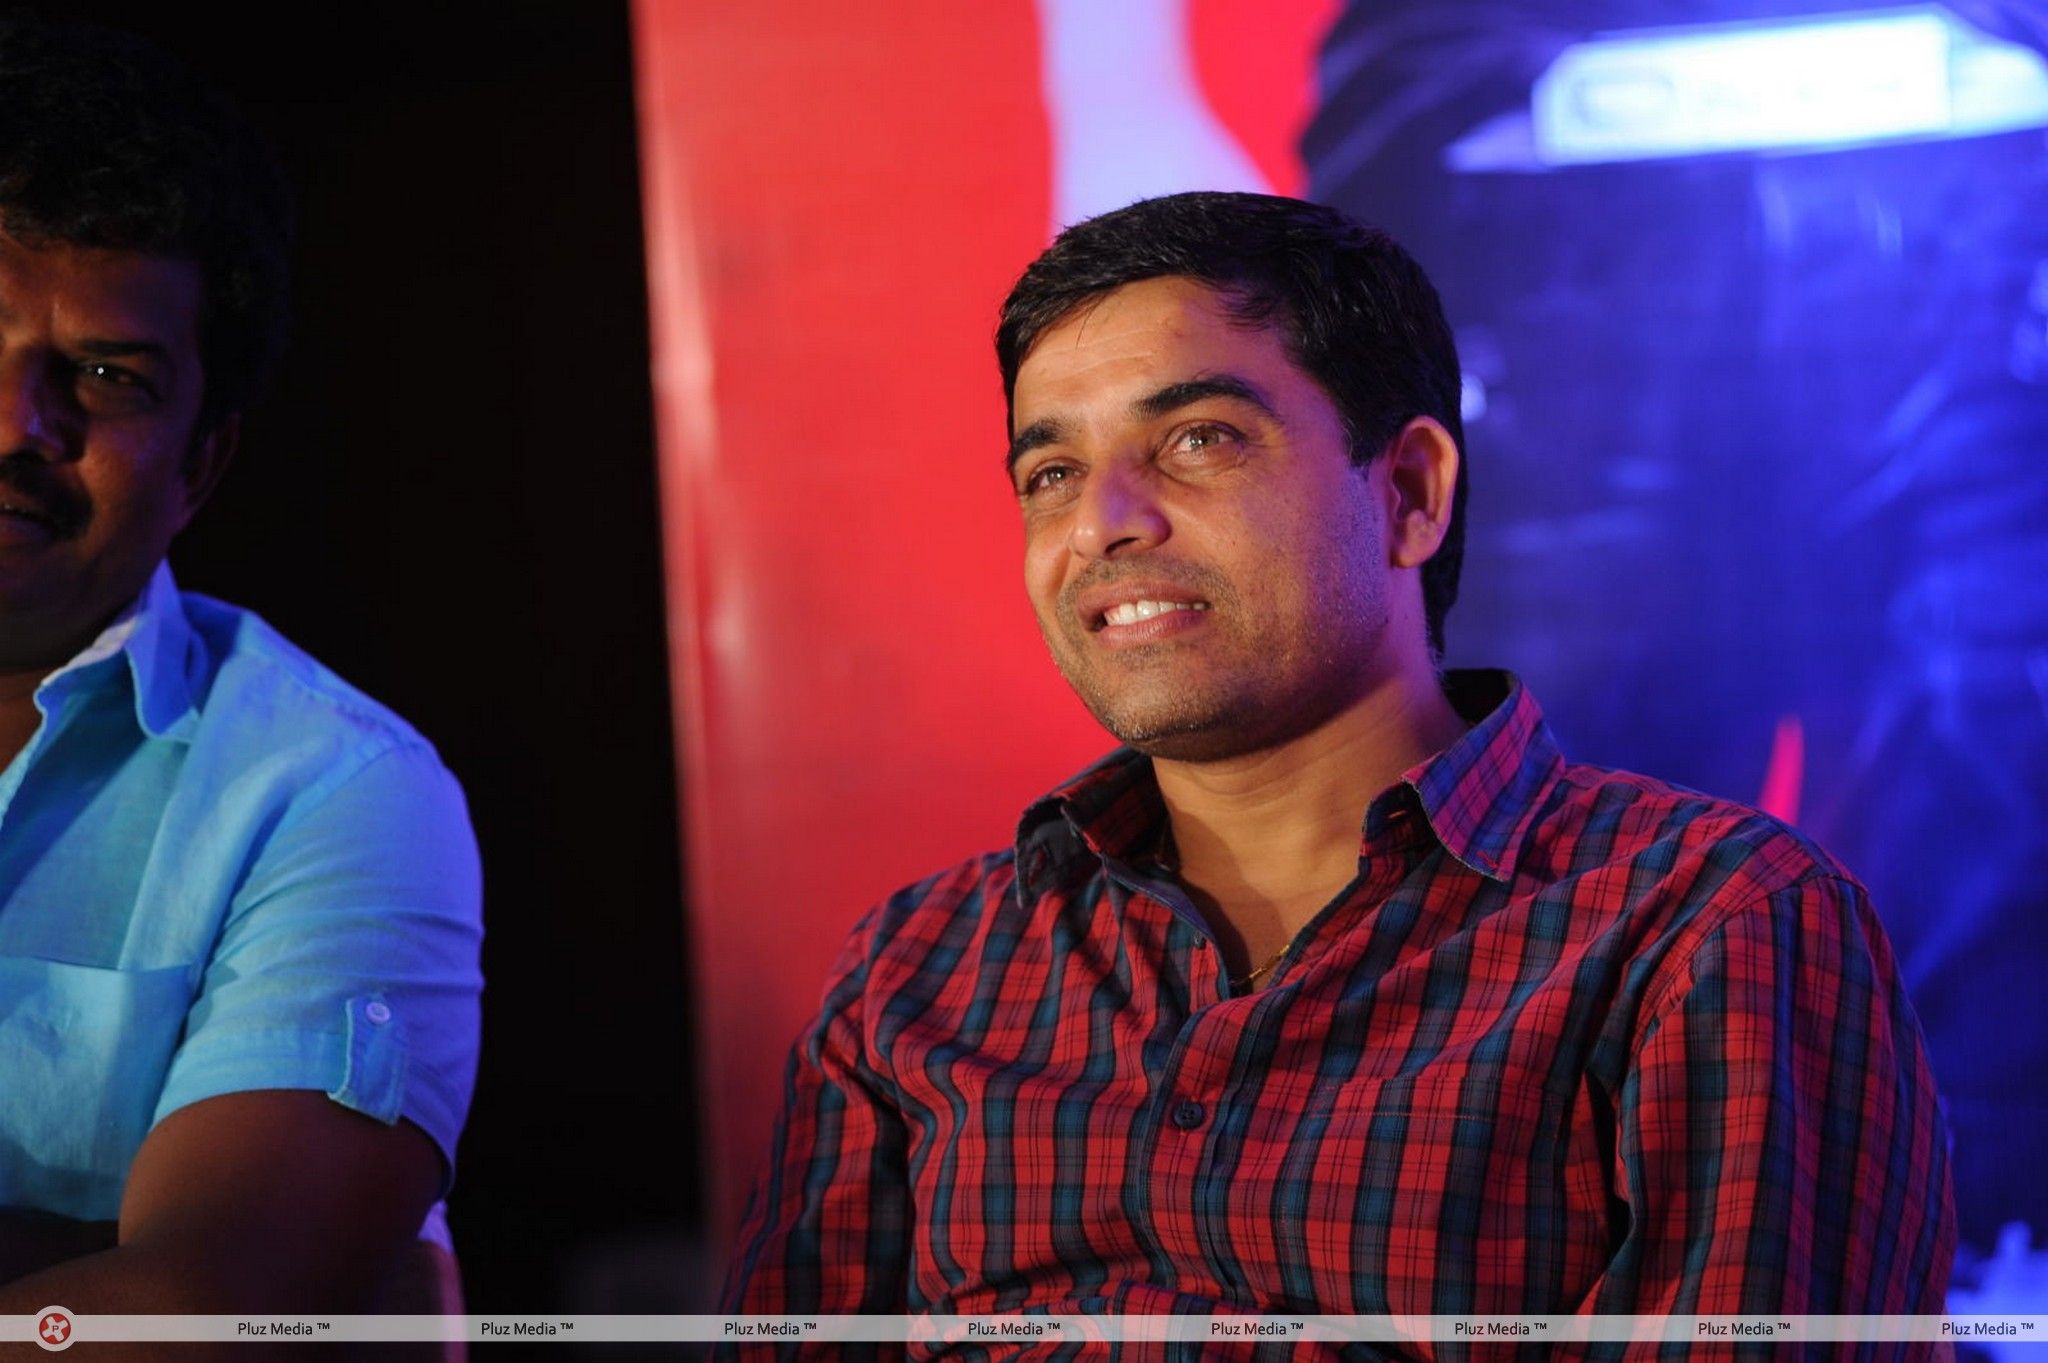 Dil Raju - Rebel Trailer Release Pictures | Picture 253212